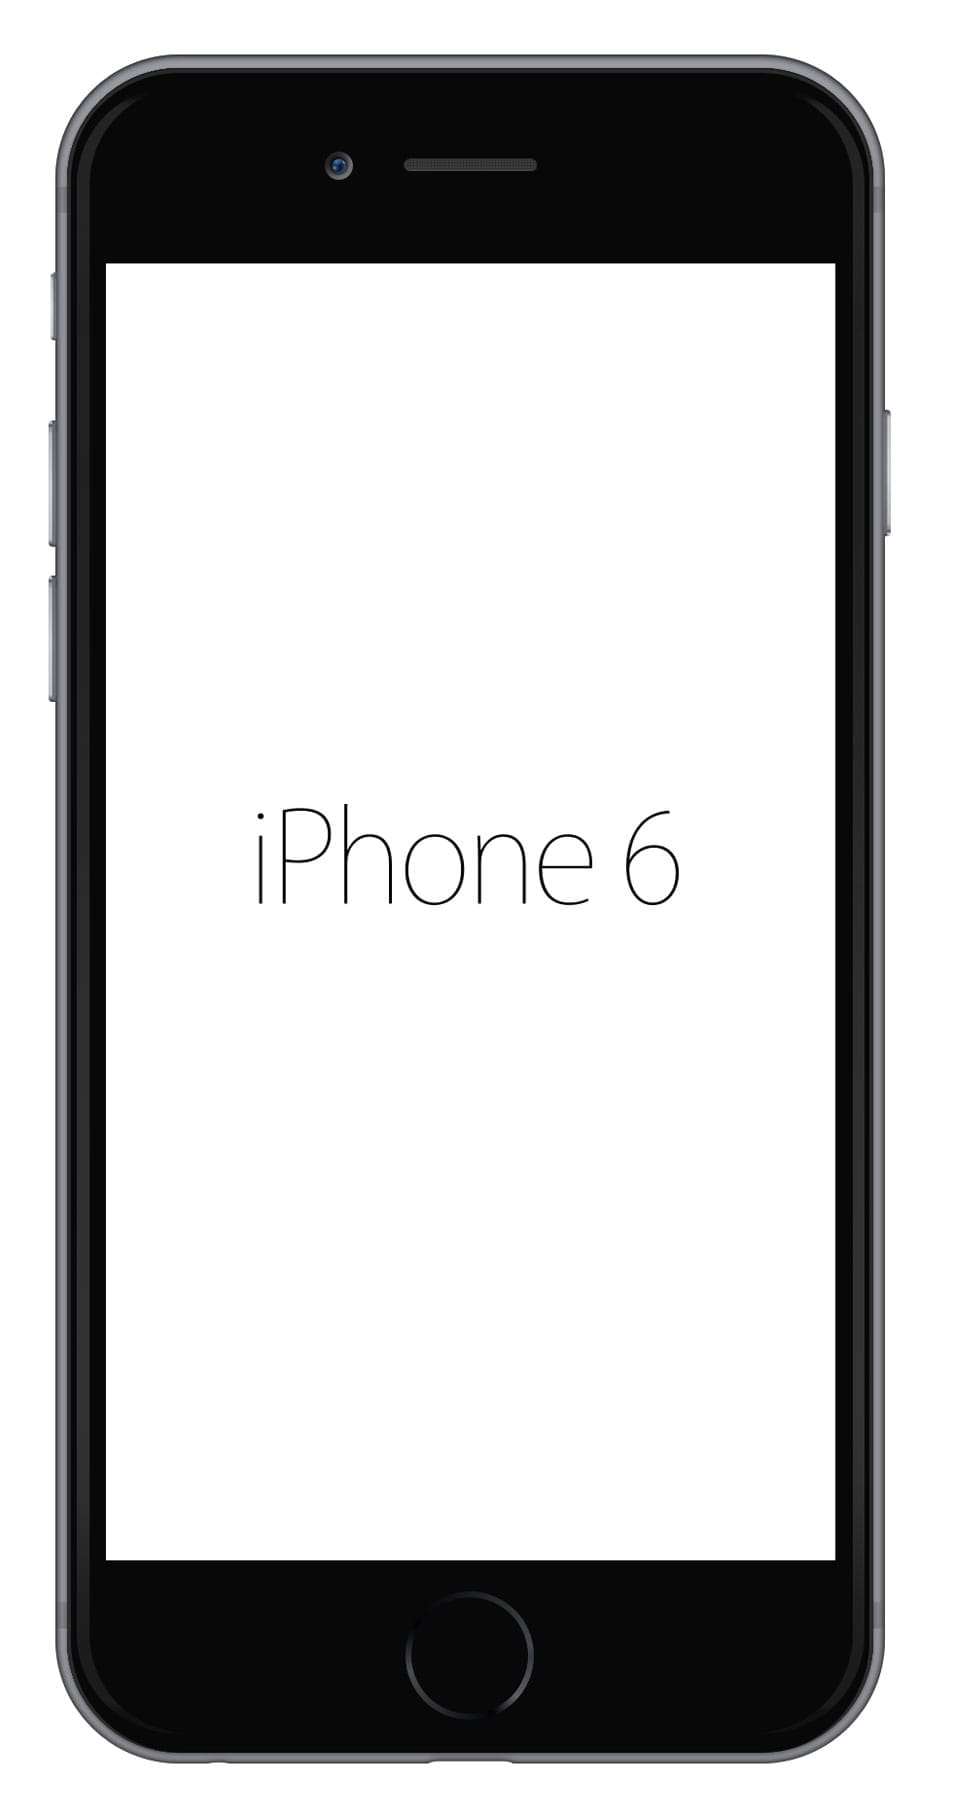 iPhone 6 Sketch Template